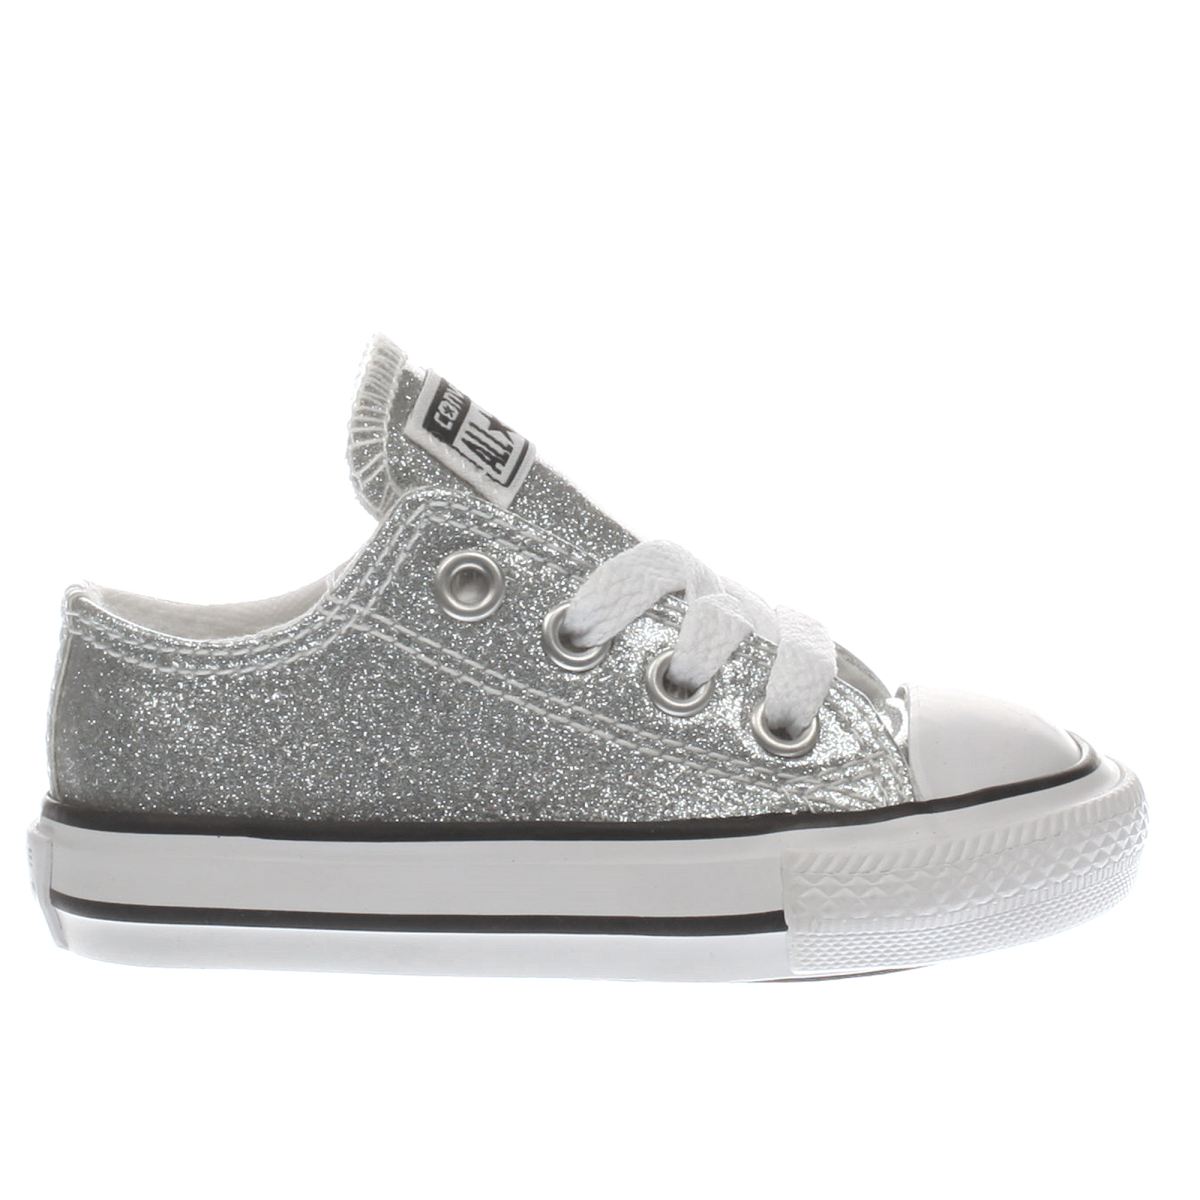 converse trainers converse silver all star ox glitter girls toddler YULWZXV